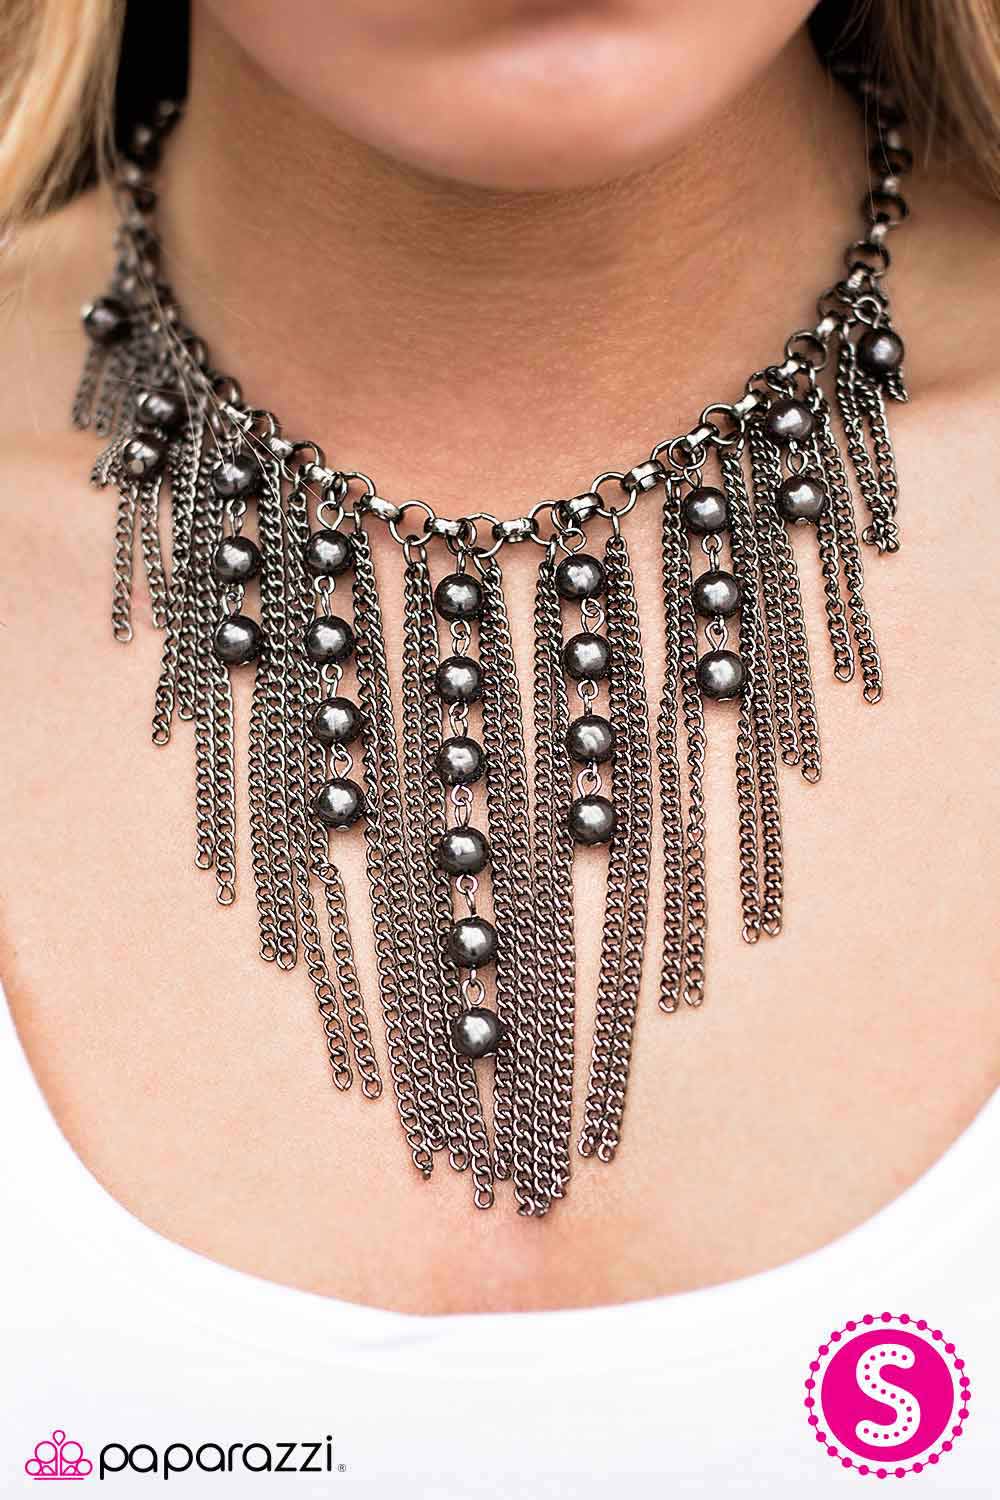 A Risk I Am Willing to Take - black - Paparazzi necklace